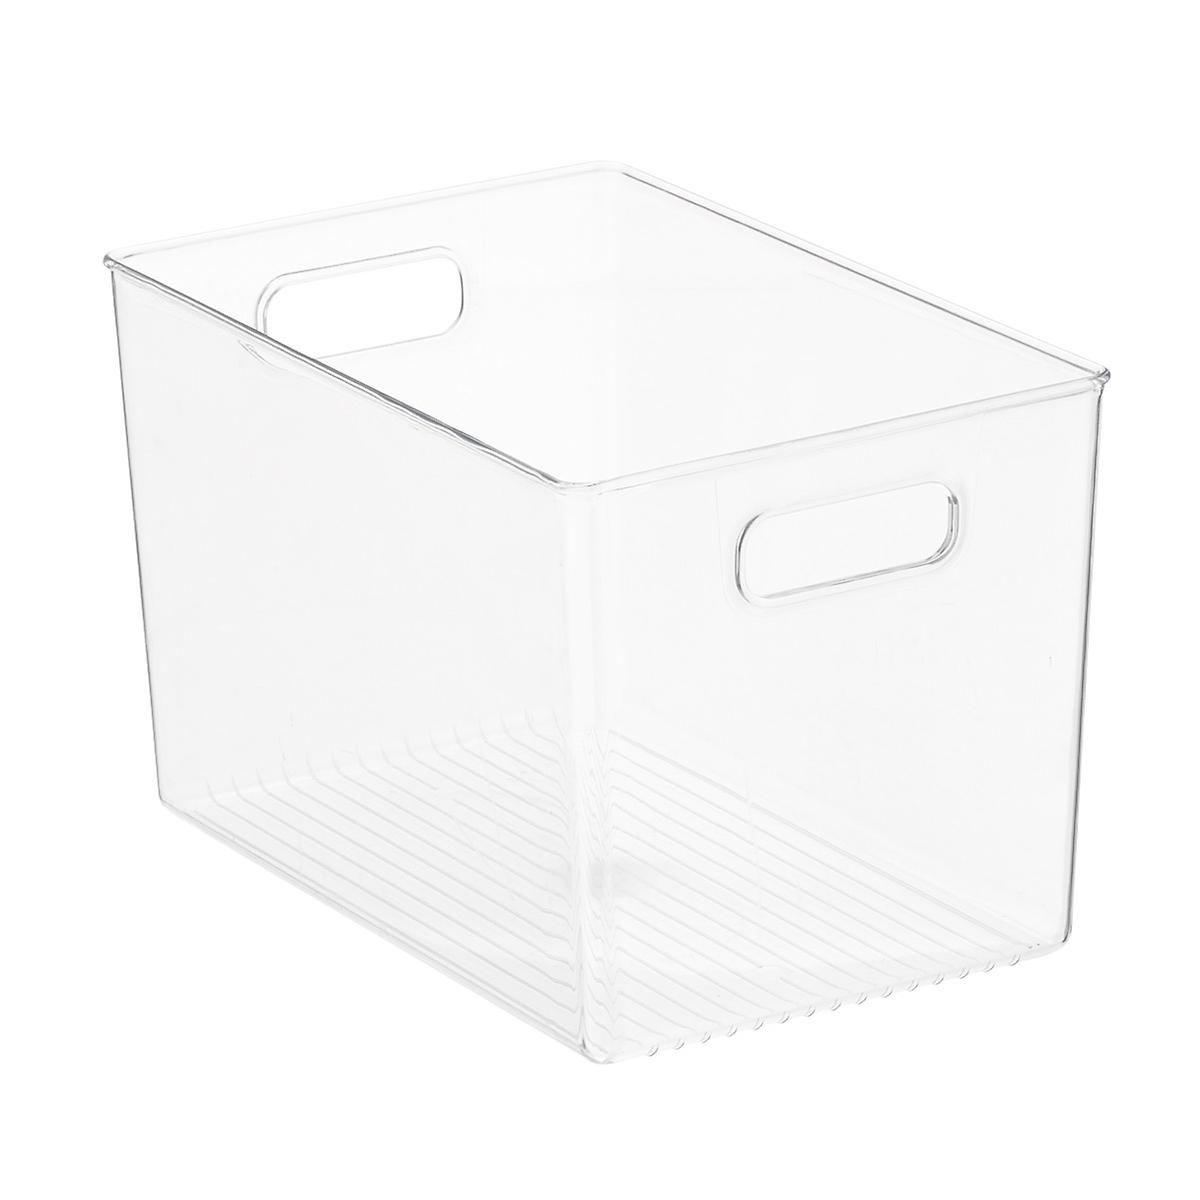 IDesign Linus Kitchen Bins | The Container Store